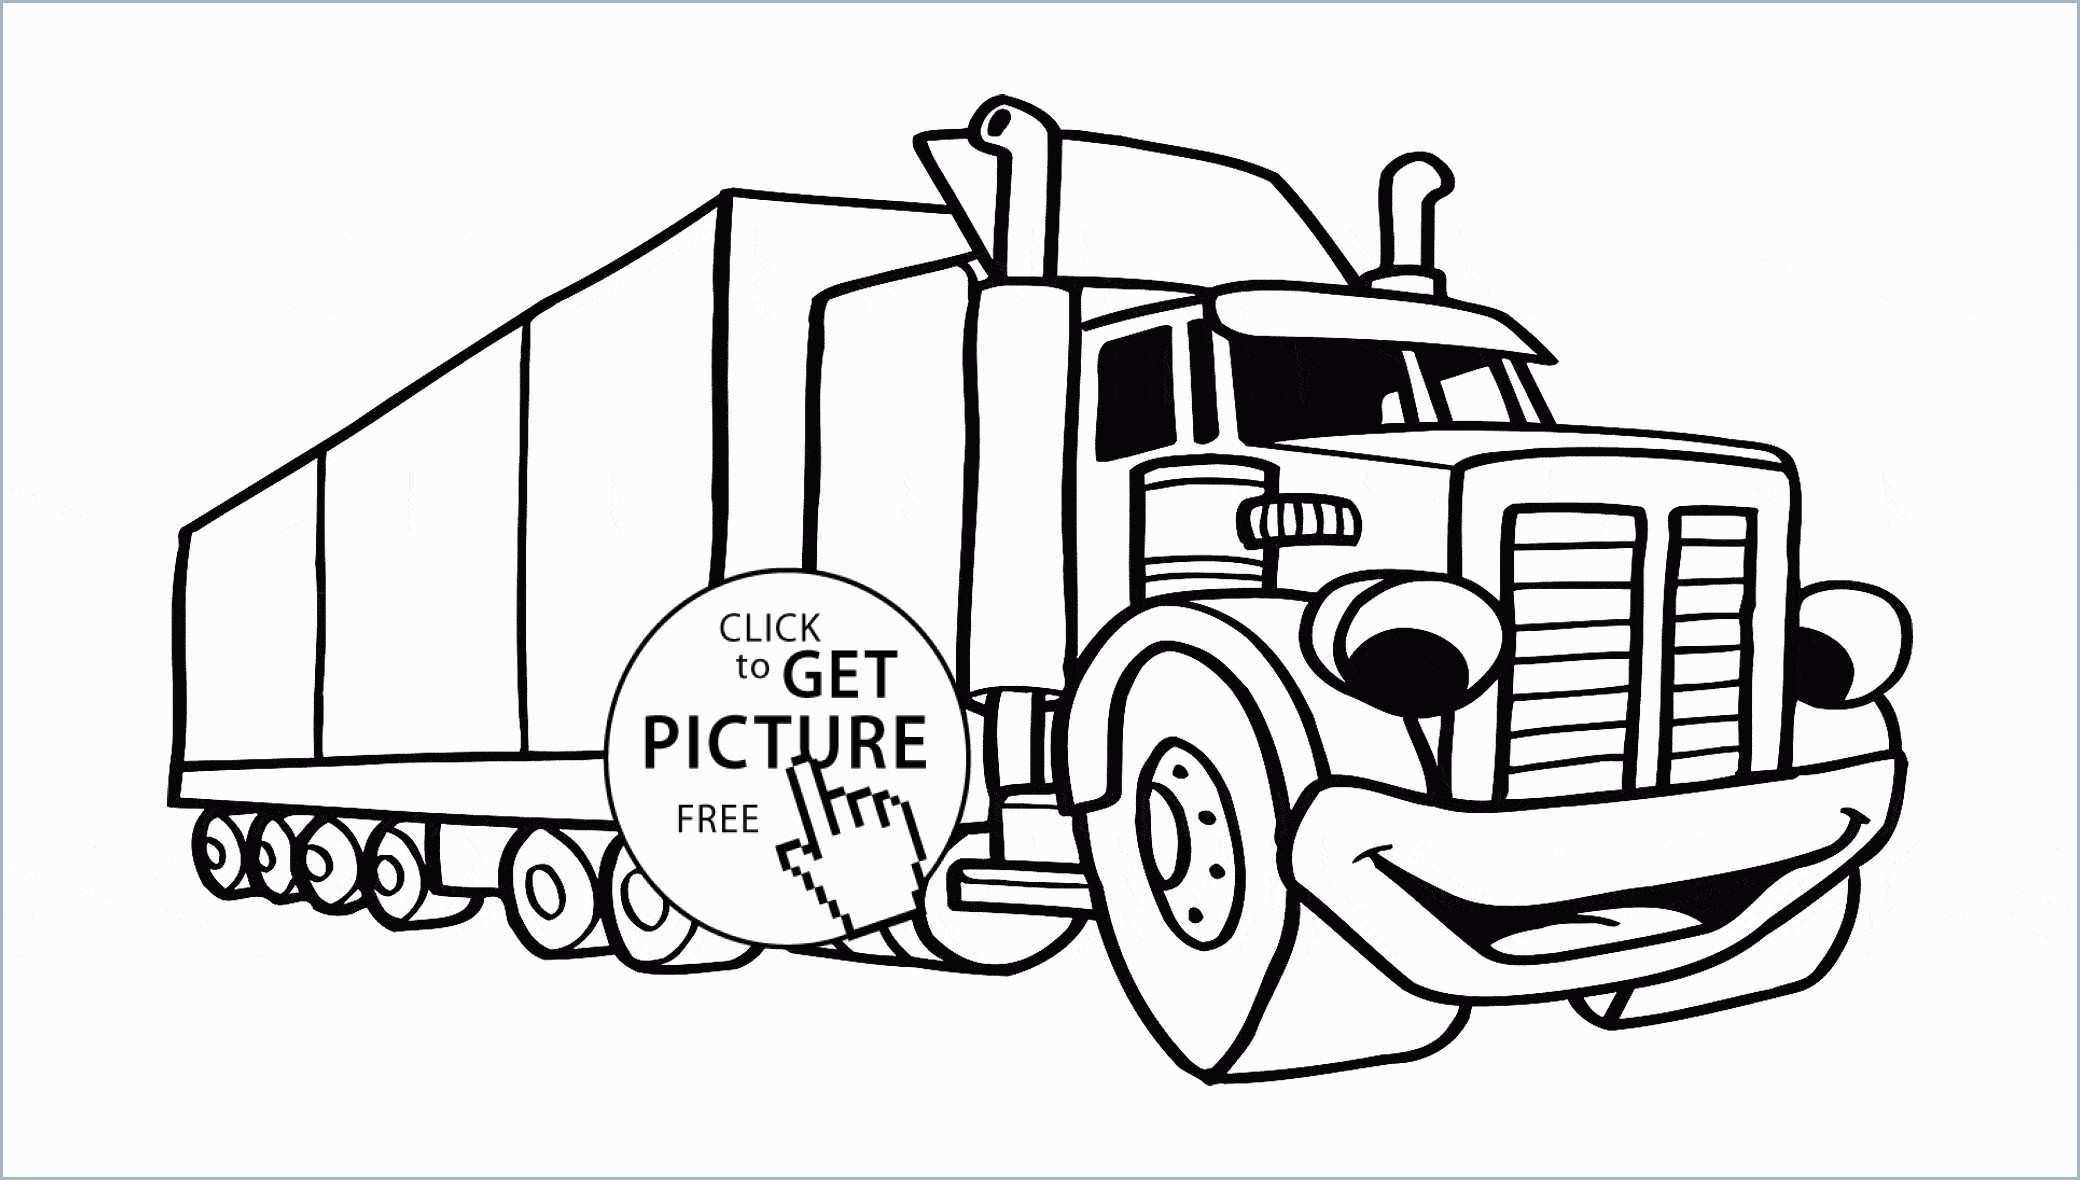 Tractor Trailer Truck Coloring Pages Coloring Pages